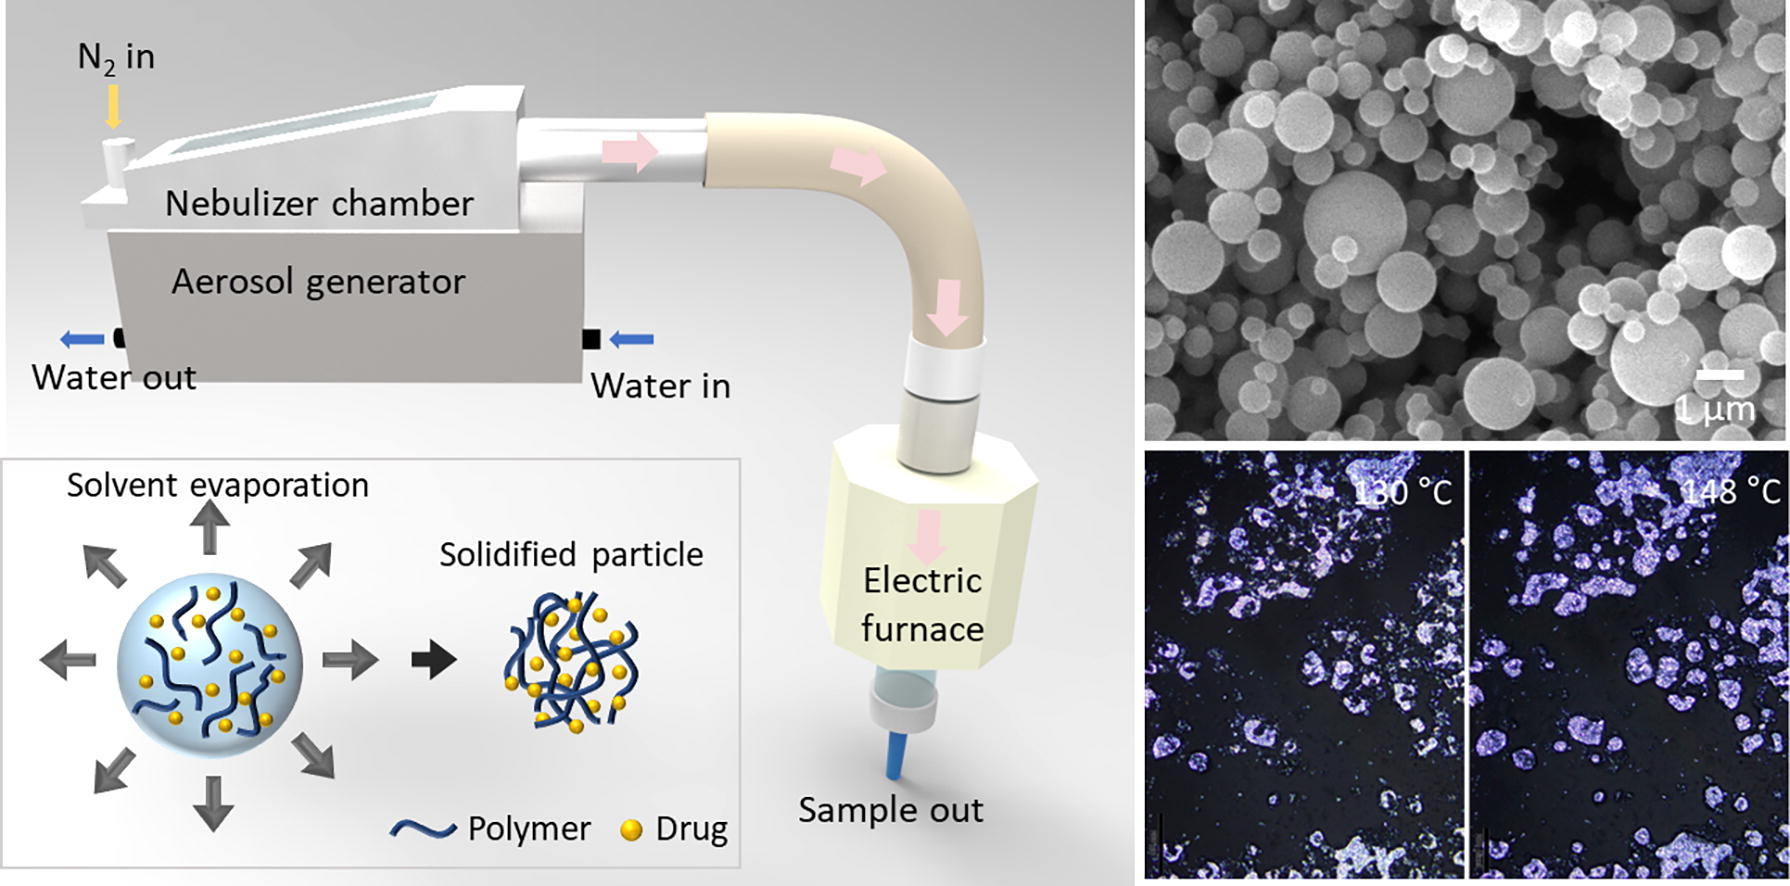 Fabrication and evaluation of stable amorphous polymer-drug composite particles via a nozzle-free ultrasonic nebulizer